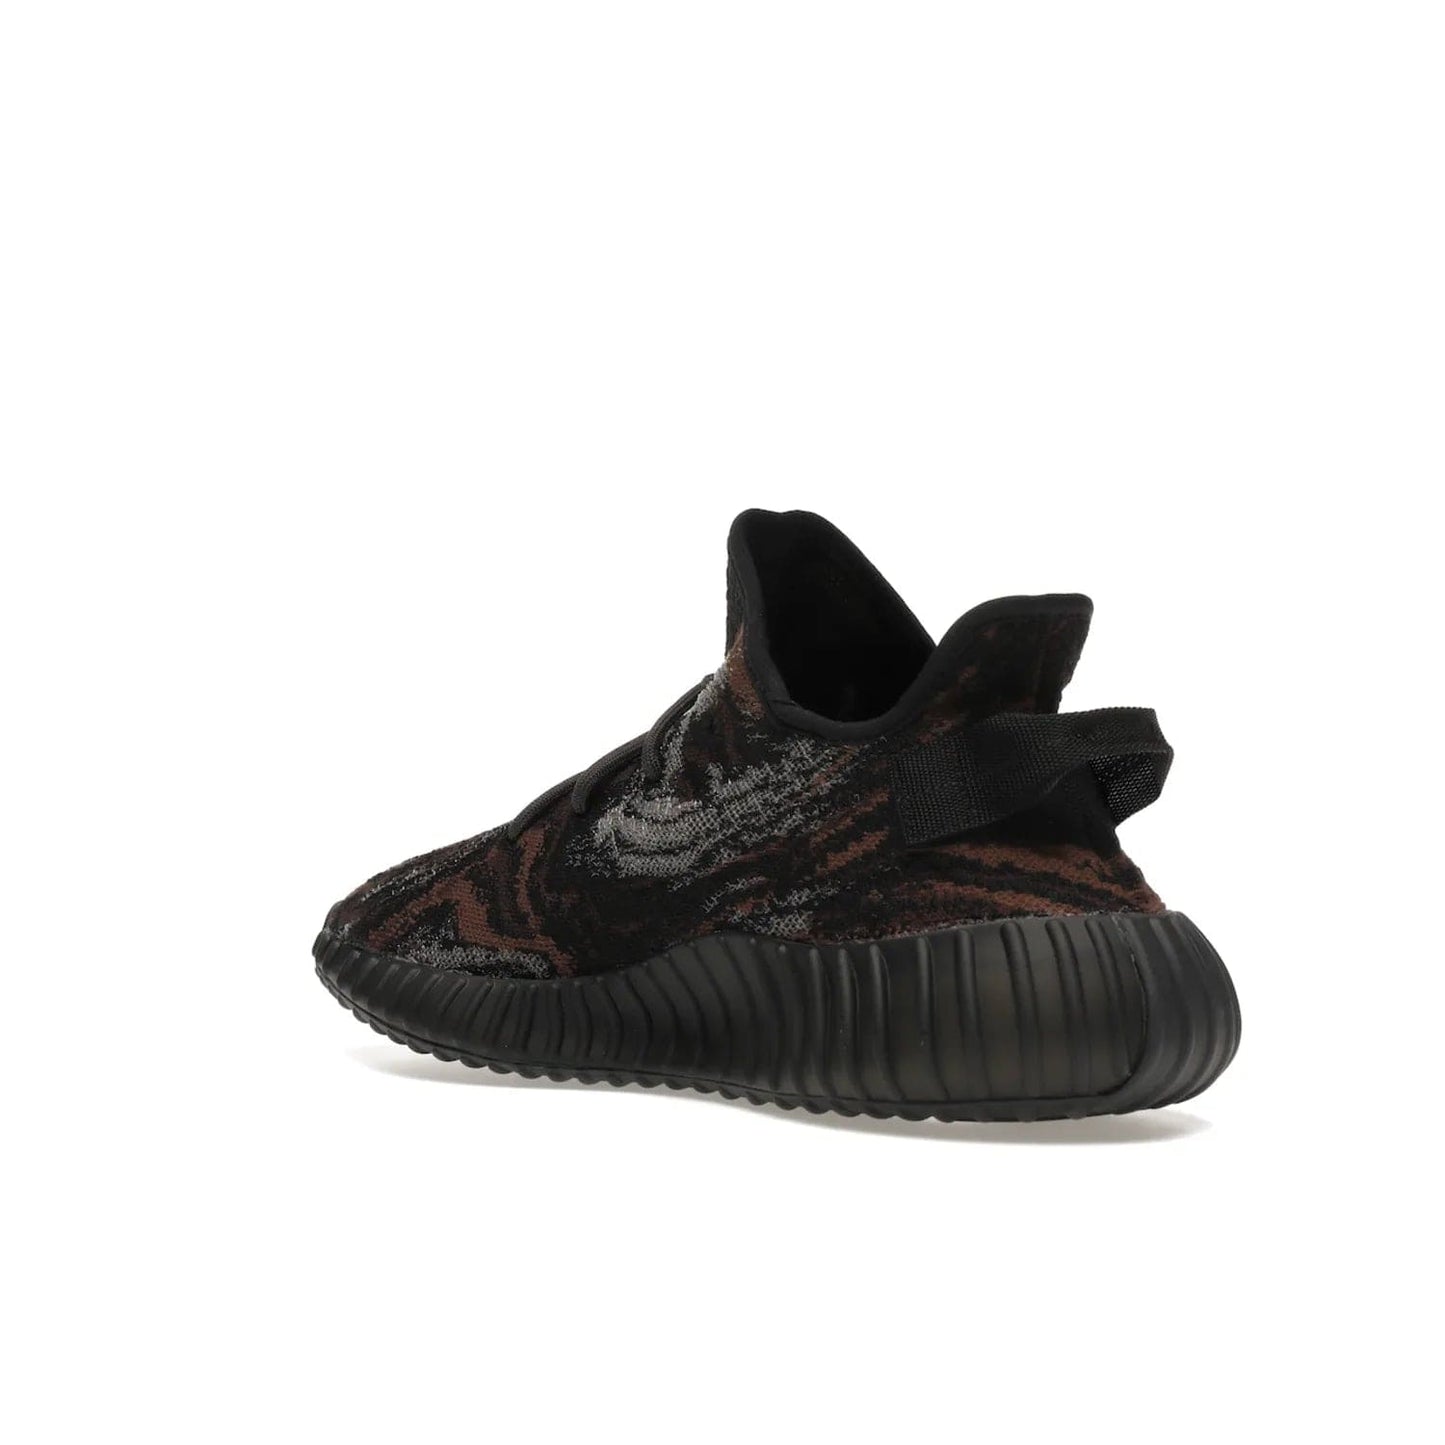 adidas Yeezy Boost 350 V2 MX Rock - Image 24 - Only at www.BallersClubKickz.com - The adidas Yeezy Boost 350 V2 MX Rock features a stylish marbled upper of black, grey, and brown tones. Shop the signature Boost sole, heel tab, and mesh side stripe now, available December of 2021.